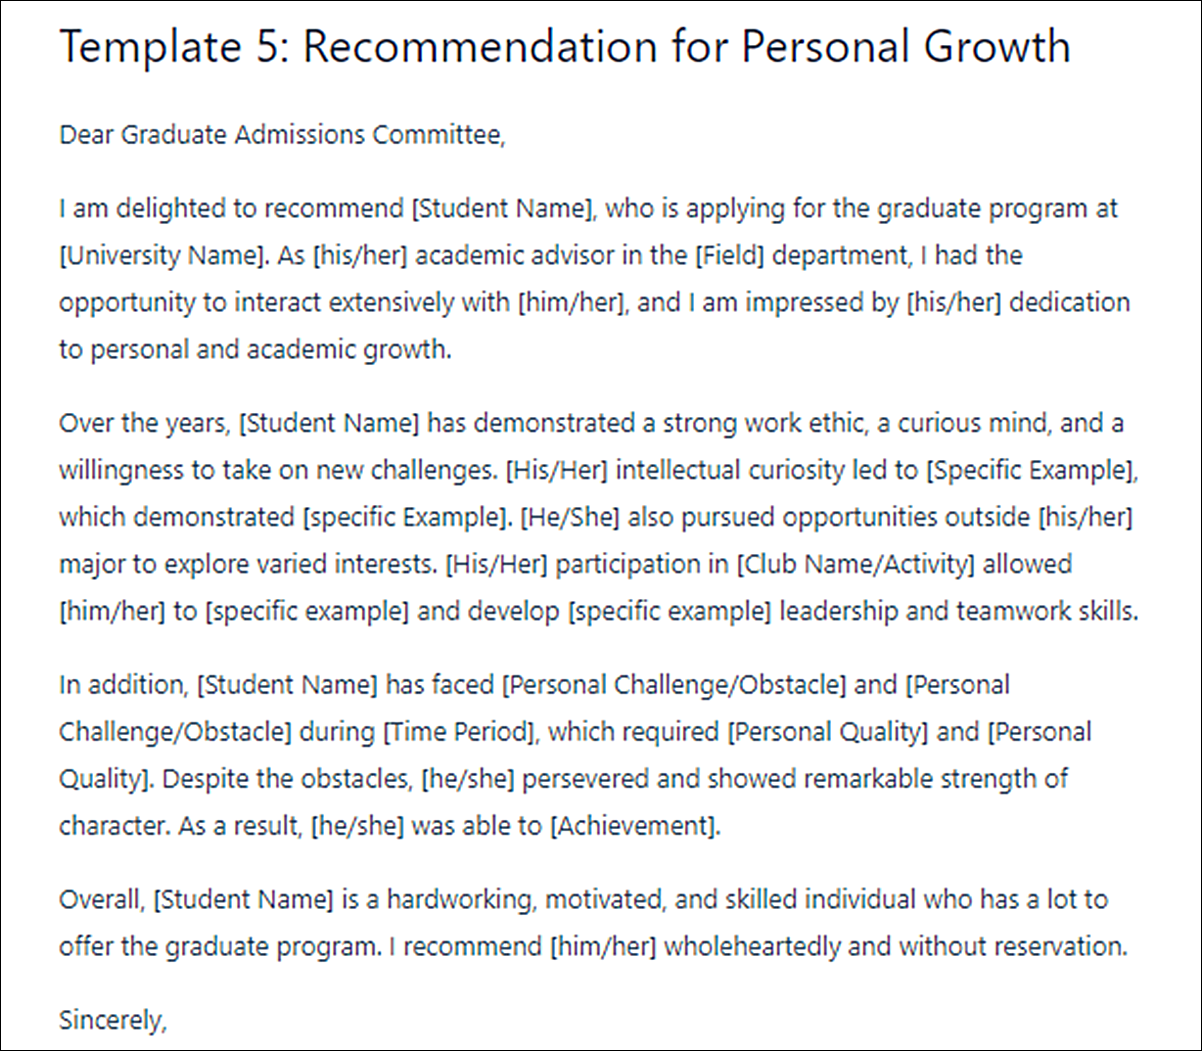 Letter of Recommendation Template for Graduate Program Applicants